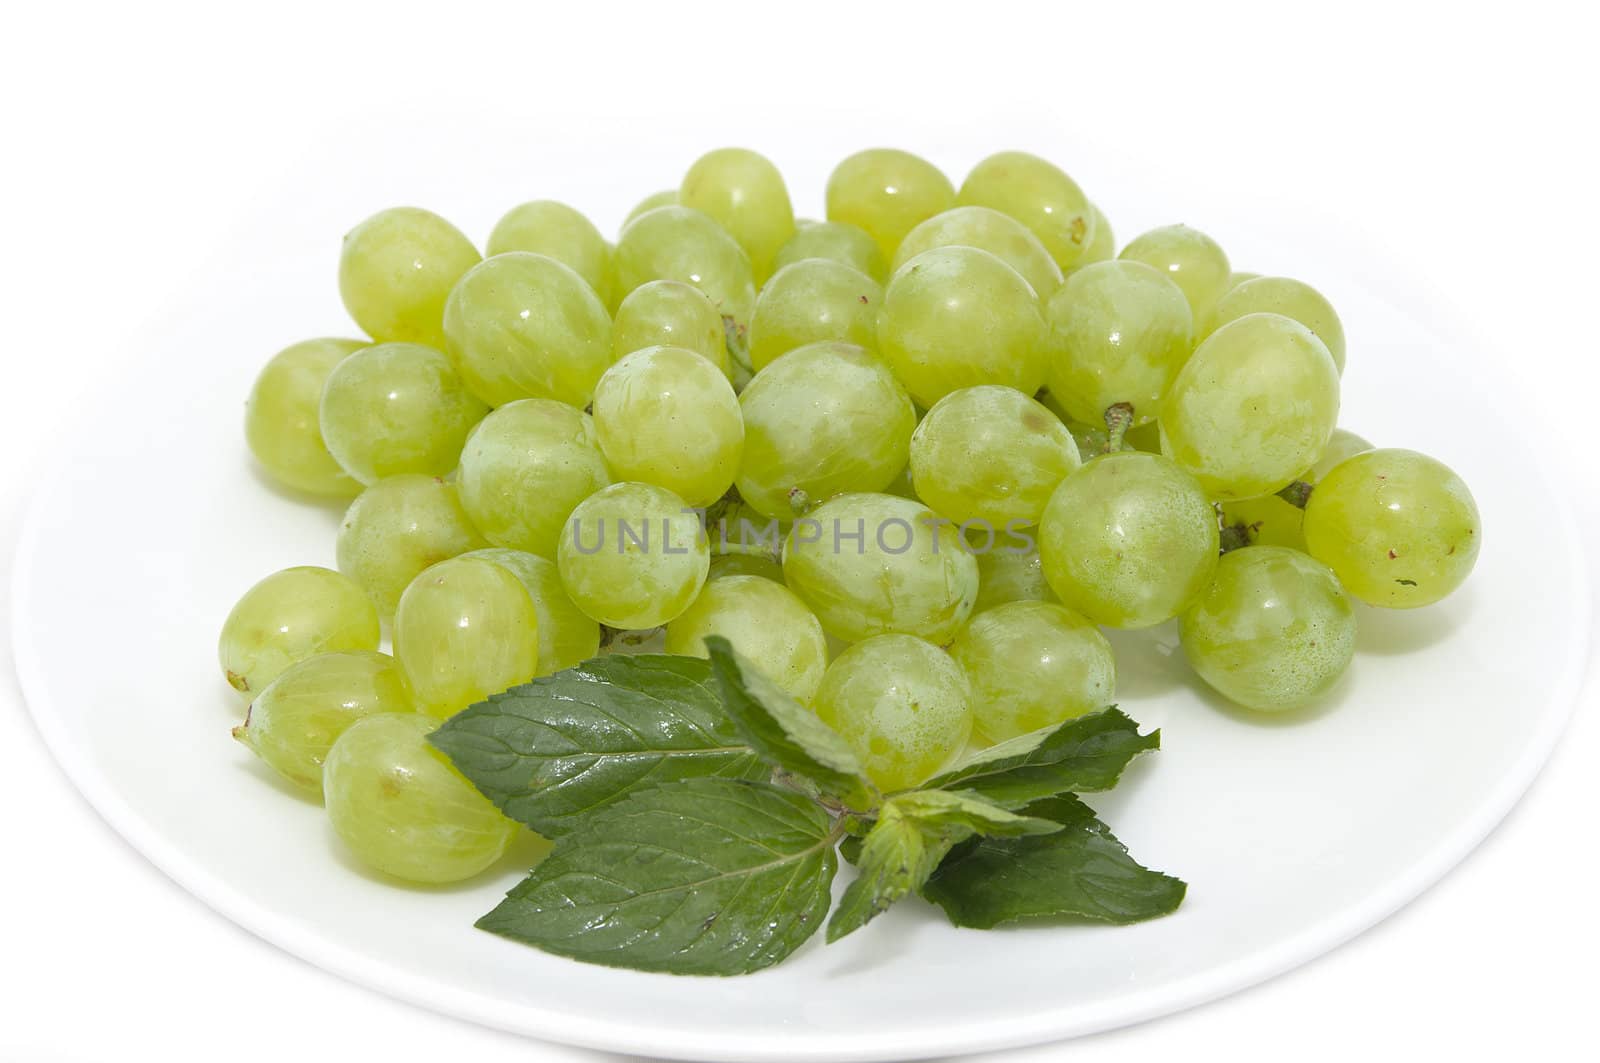 Grapes on a platter at the restaurant on a white background